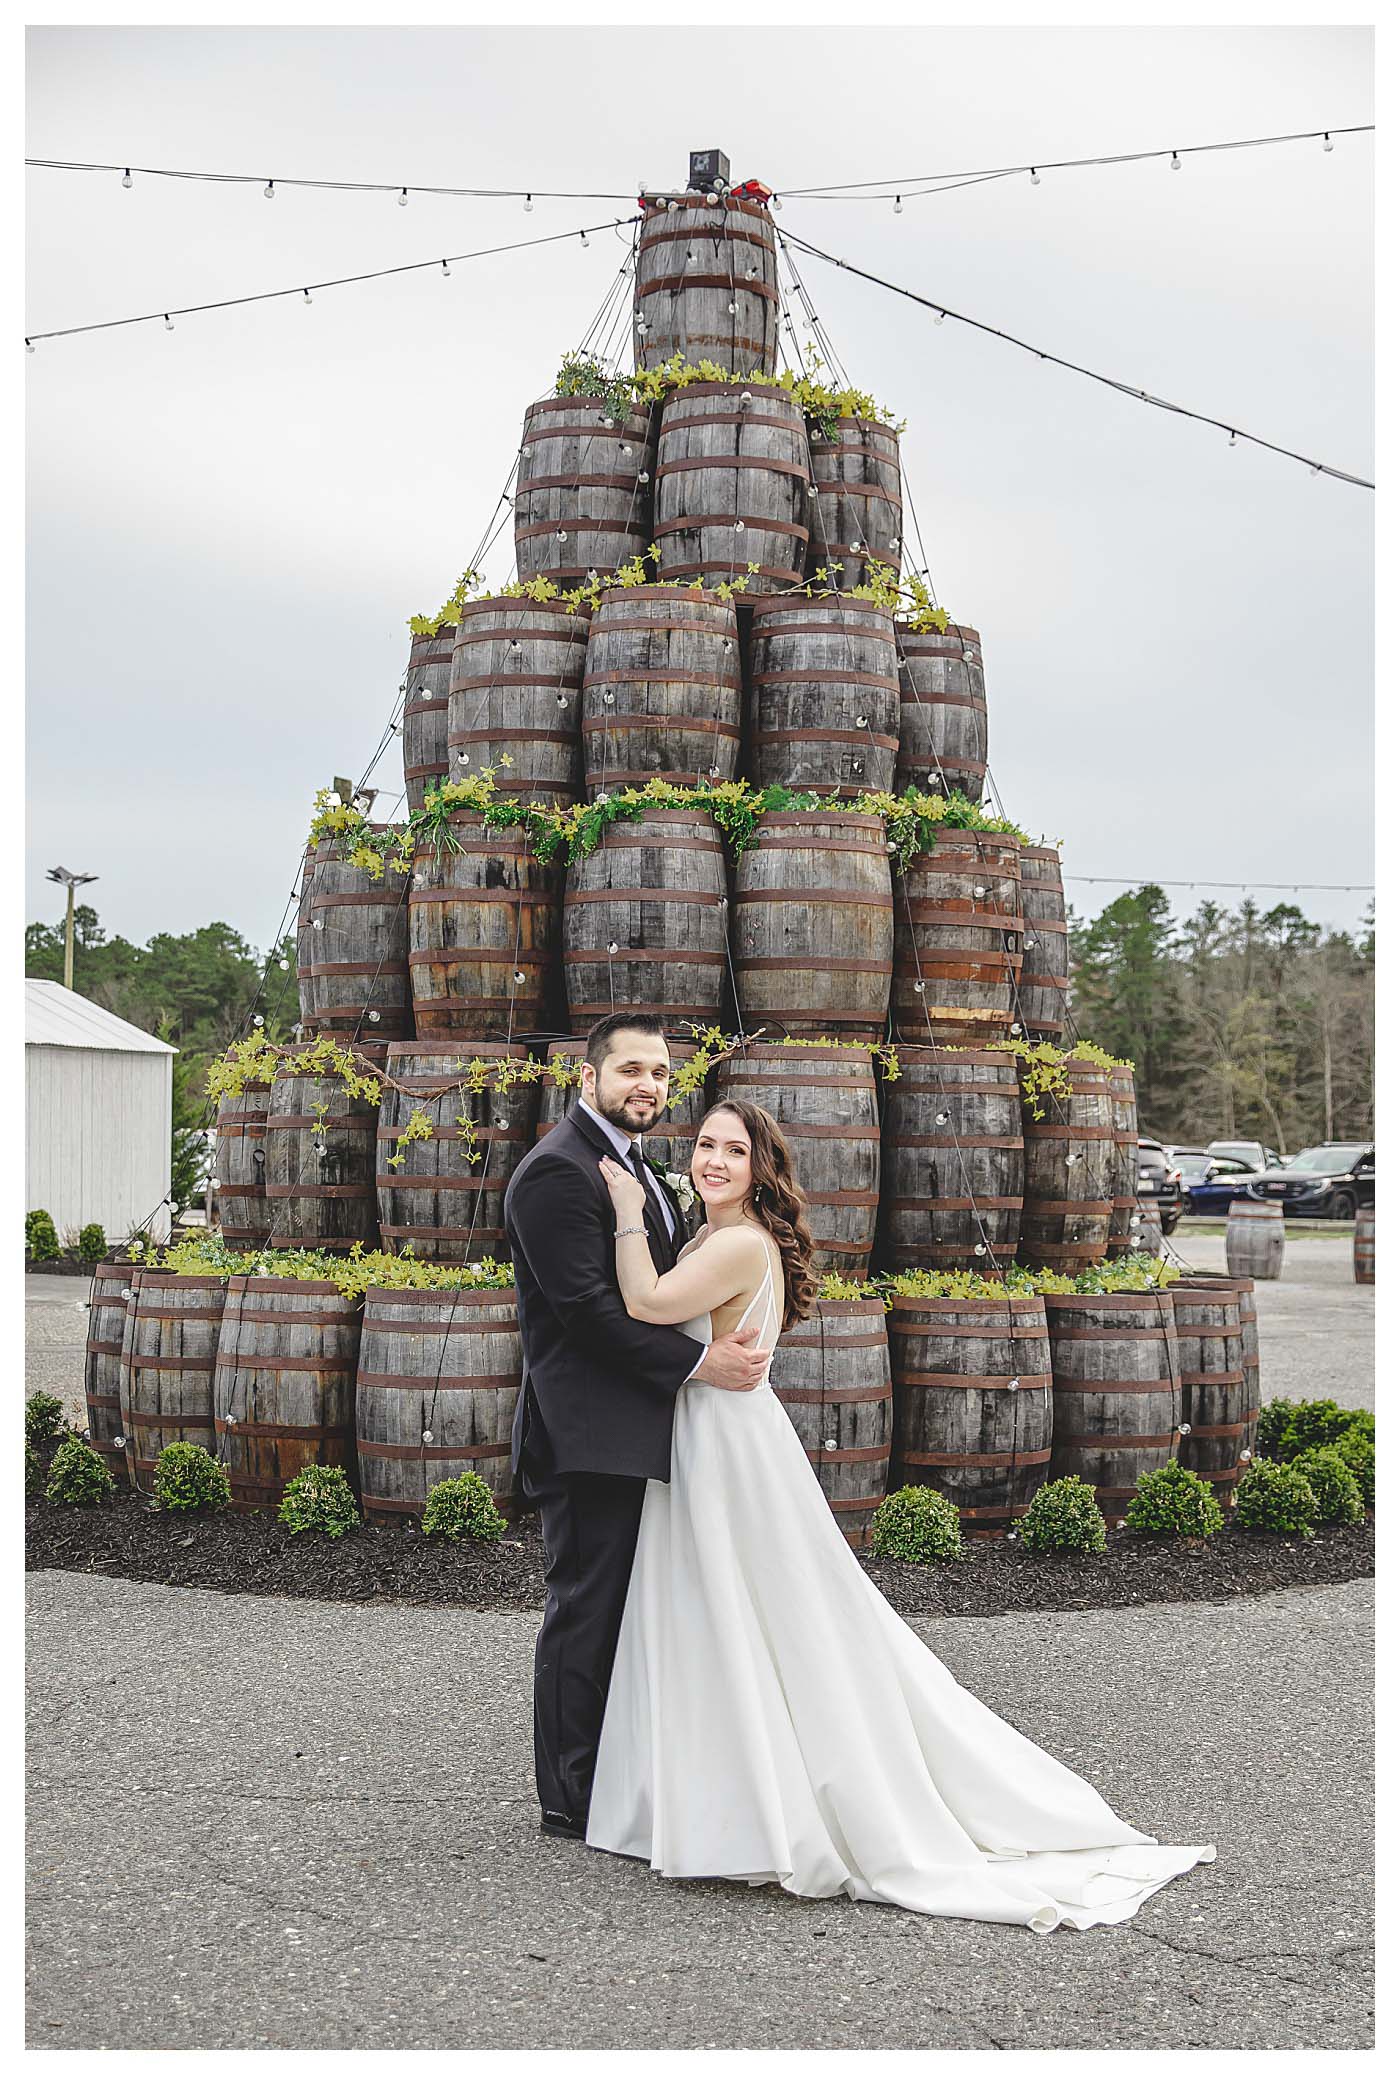 wedding couple standing in front of tree made of wine barrels